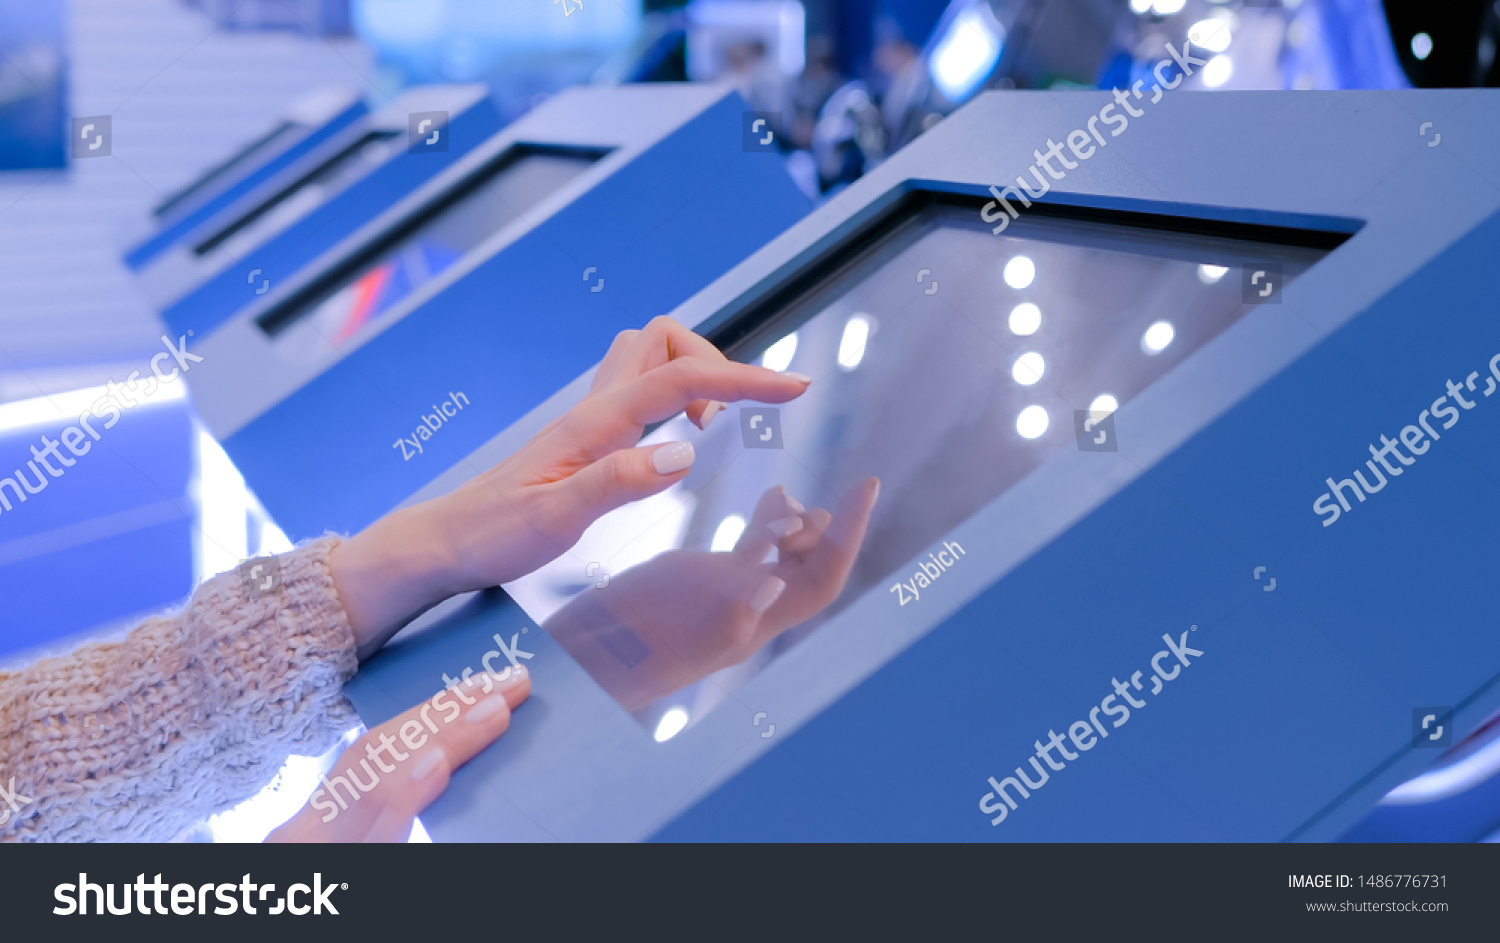 Education and technology concept - woman using interactive touchscreen display of electronic kiosk at technology exhibition #1486776731